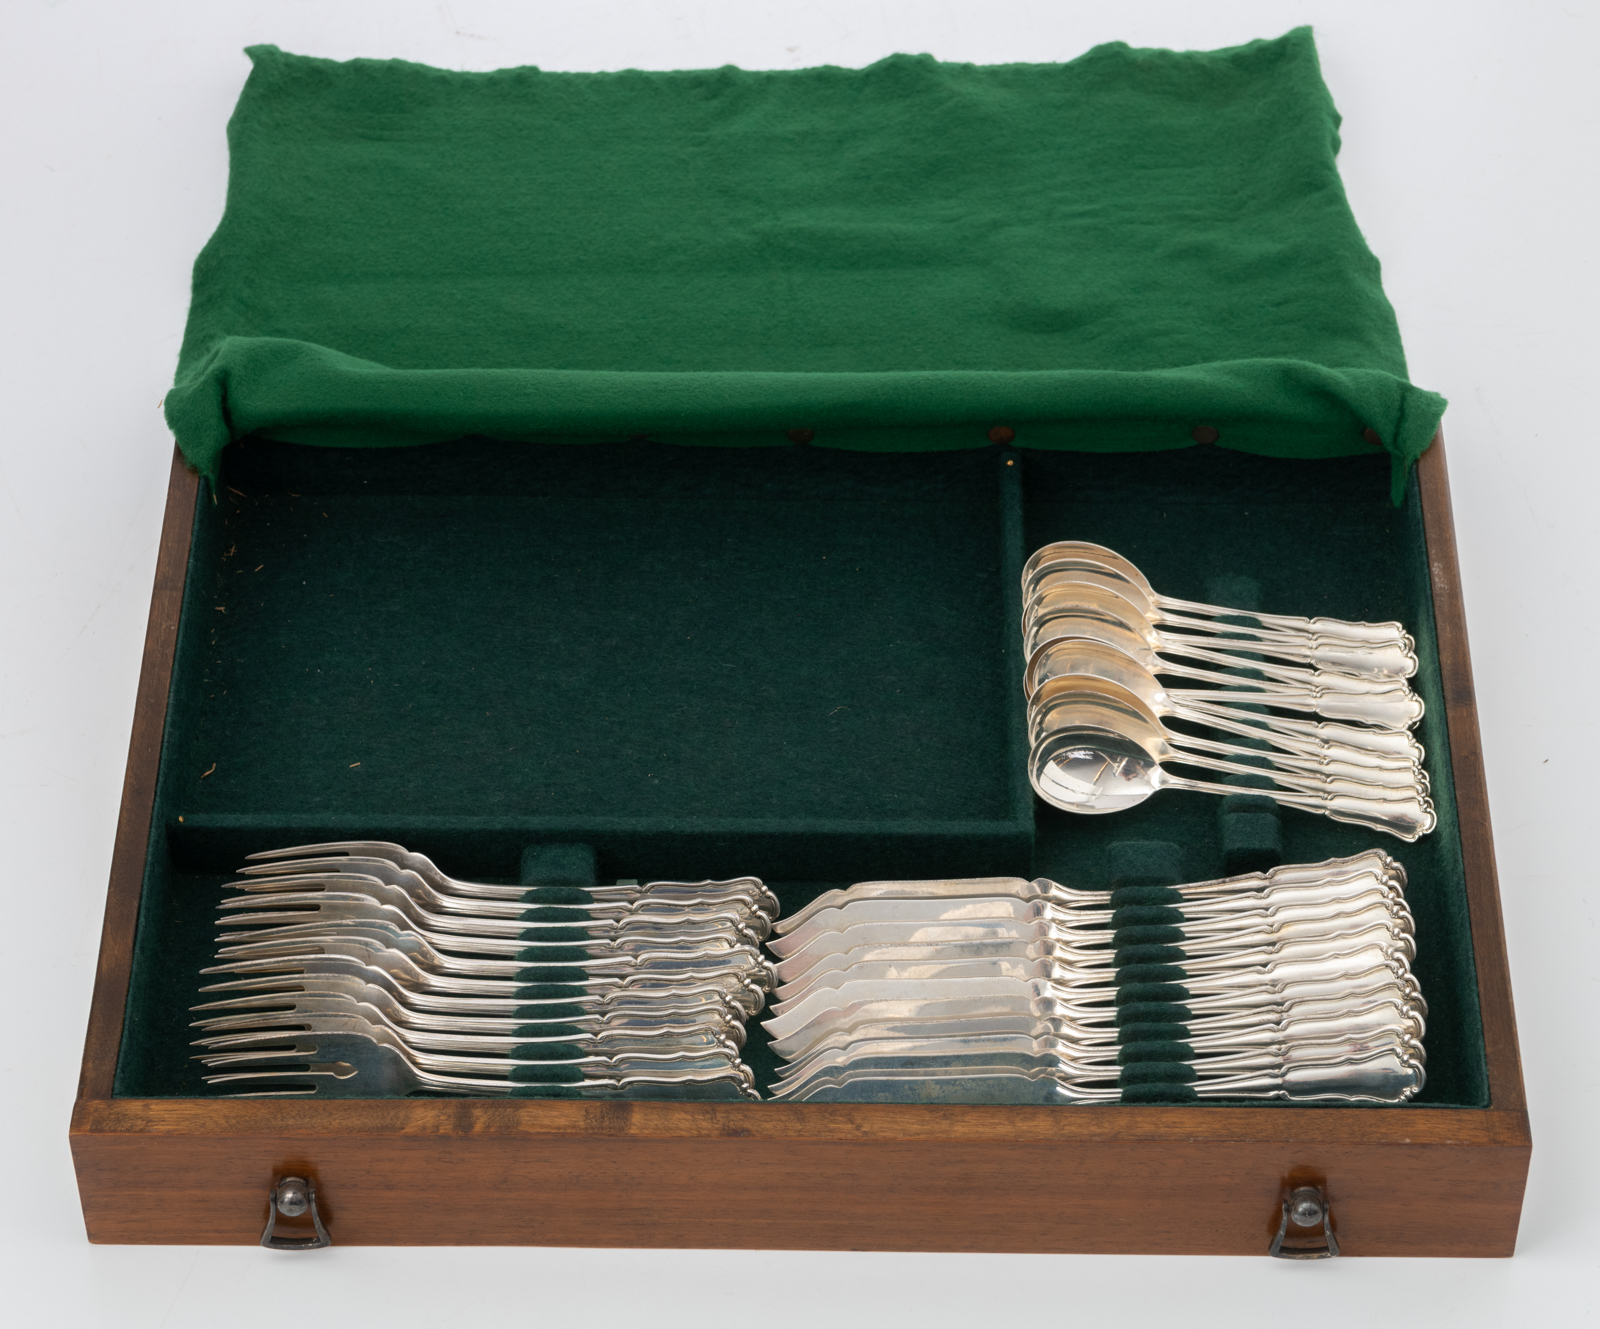 A twelve-person silver 'menagère' cutlery set 'au grand complet', 800/000, LXV model, made by Robbe - Image 2 of 8